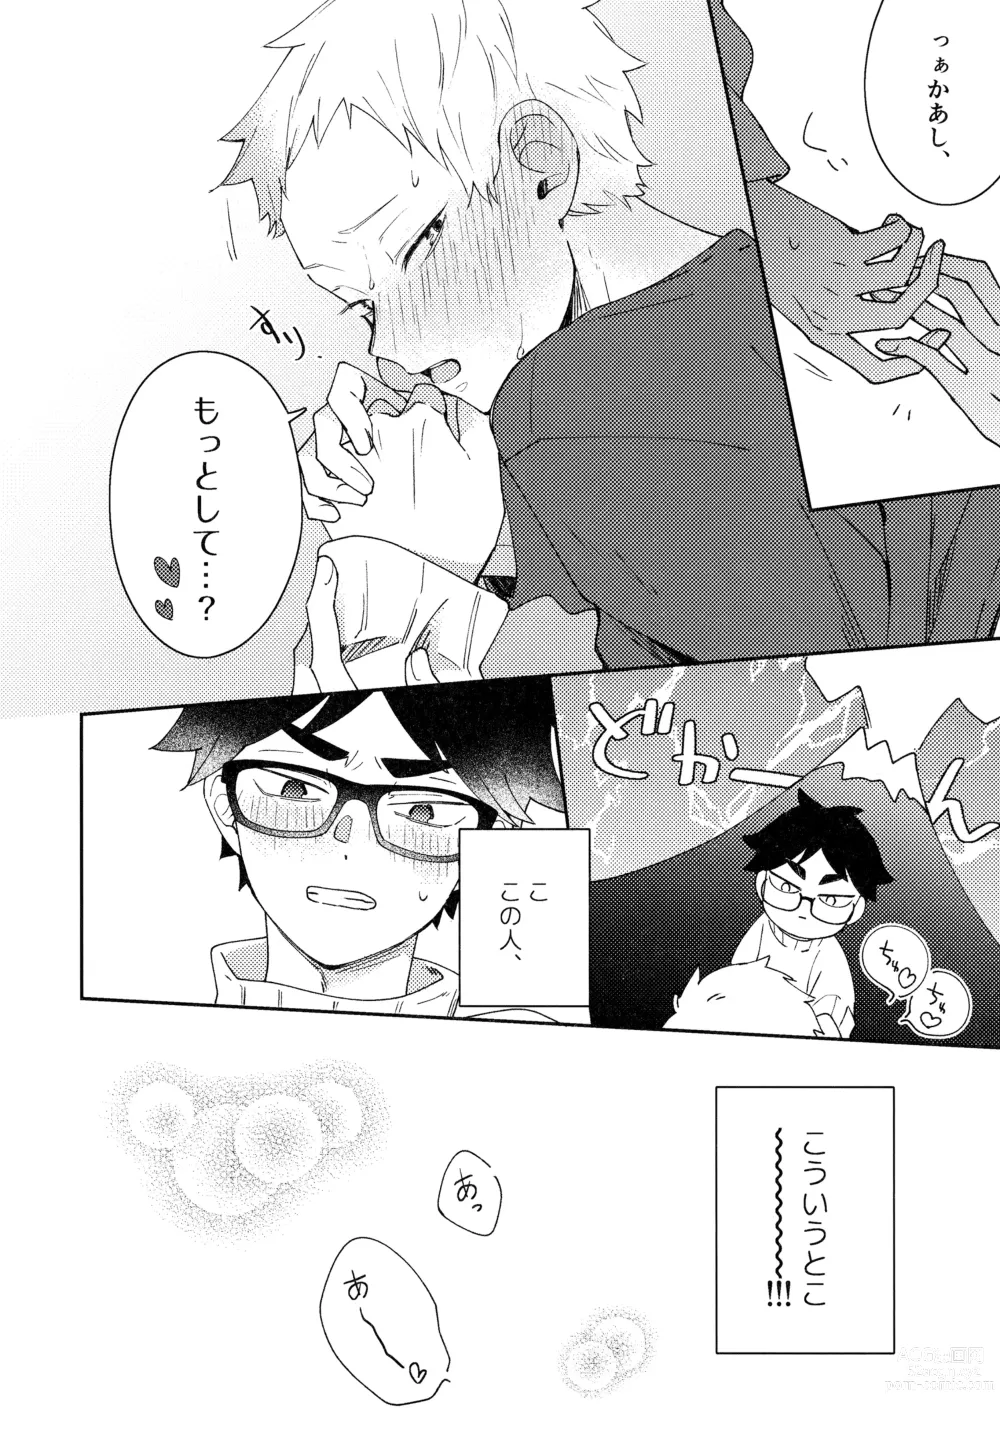 Page 132 of doujinshi Light Side Day